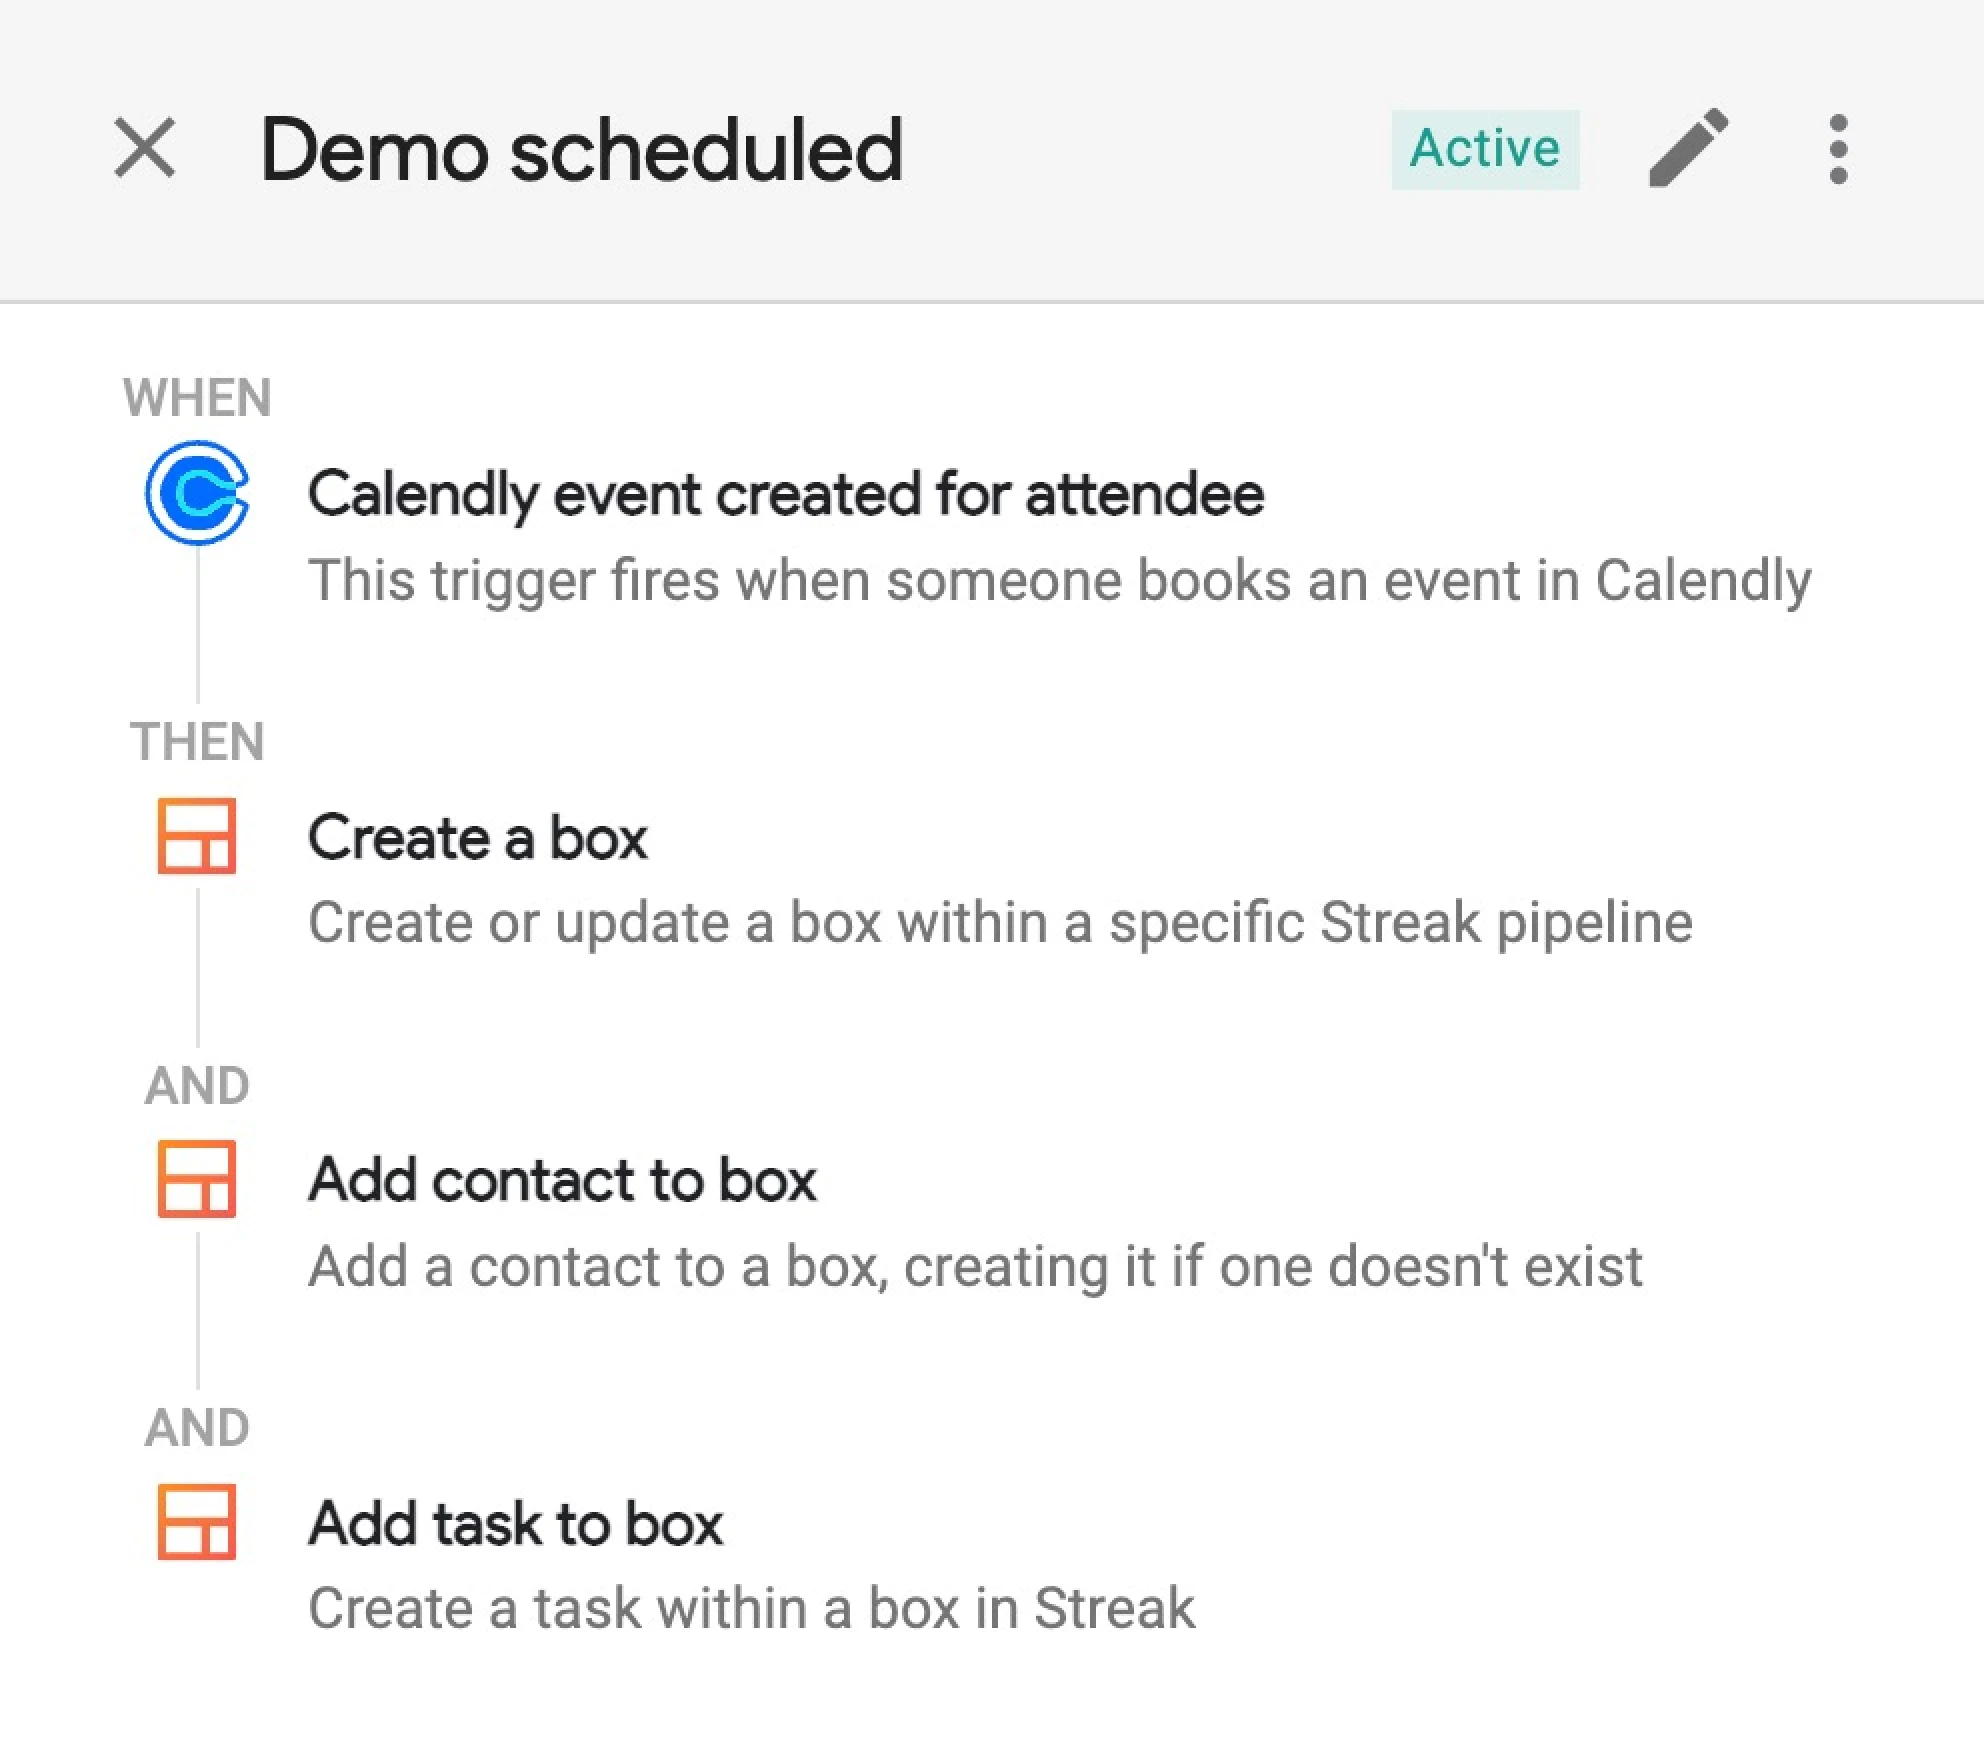 Screenshot showing a sales demo scheduled via Calendly within the Streak CRM platform.